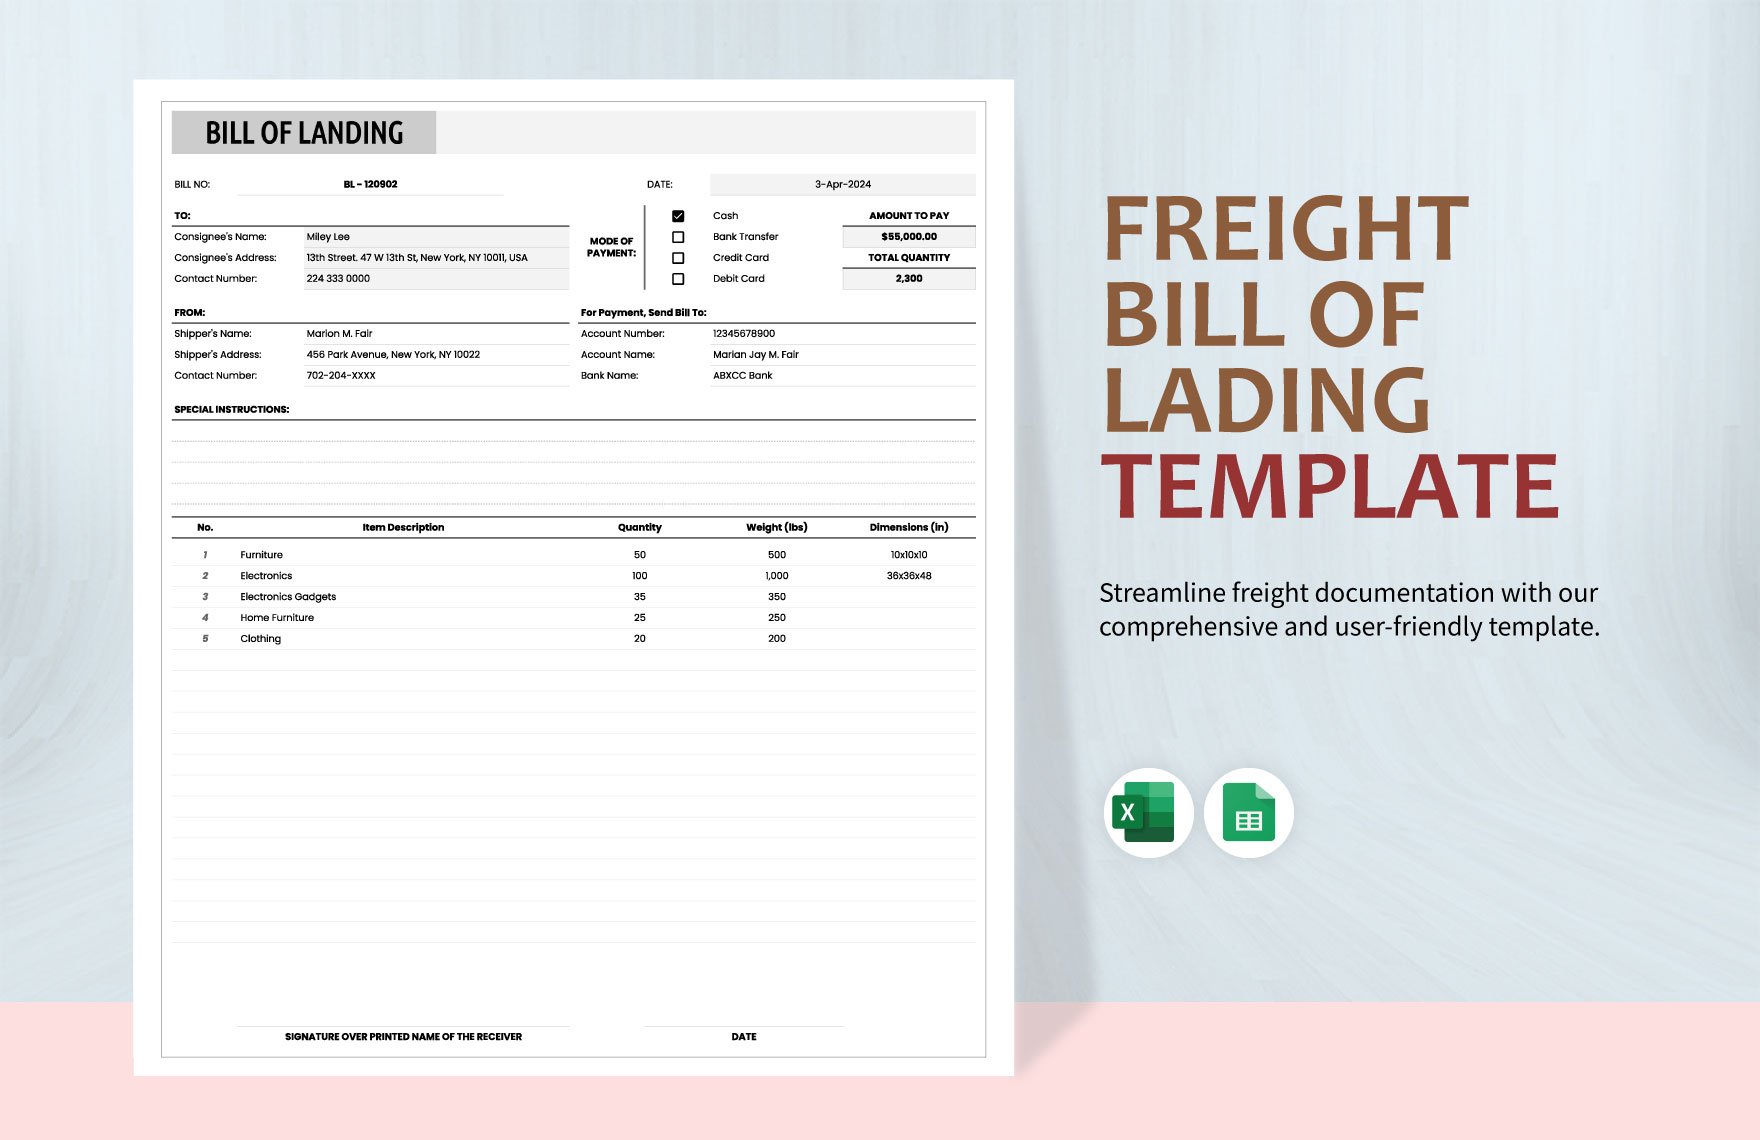 Freight Bill of Lading Template in Excel, Google Sheets